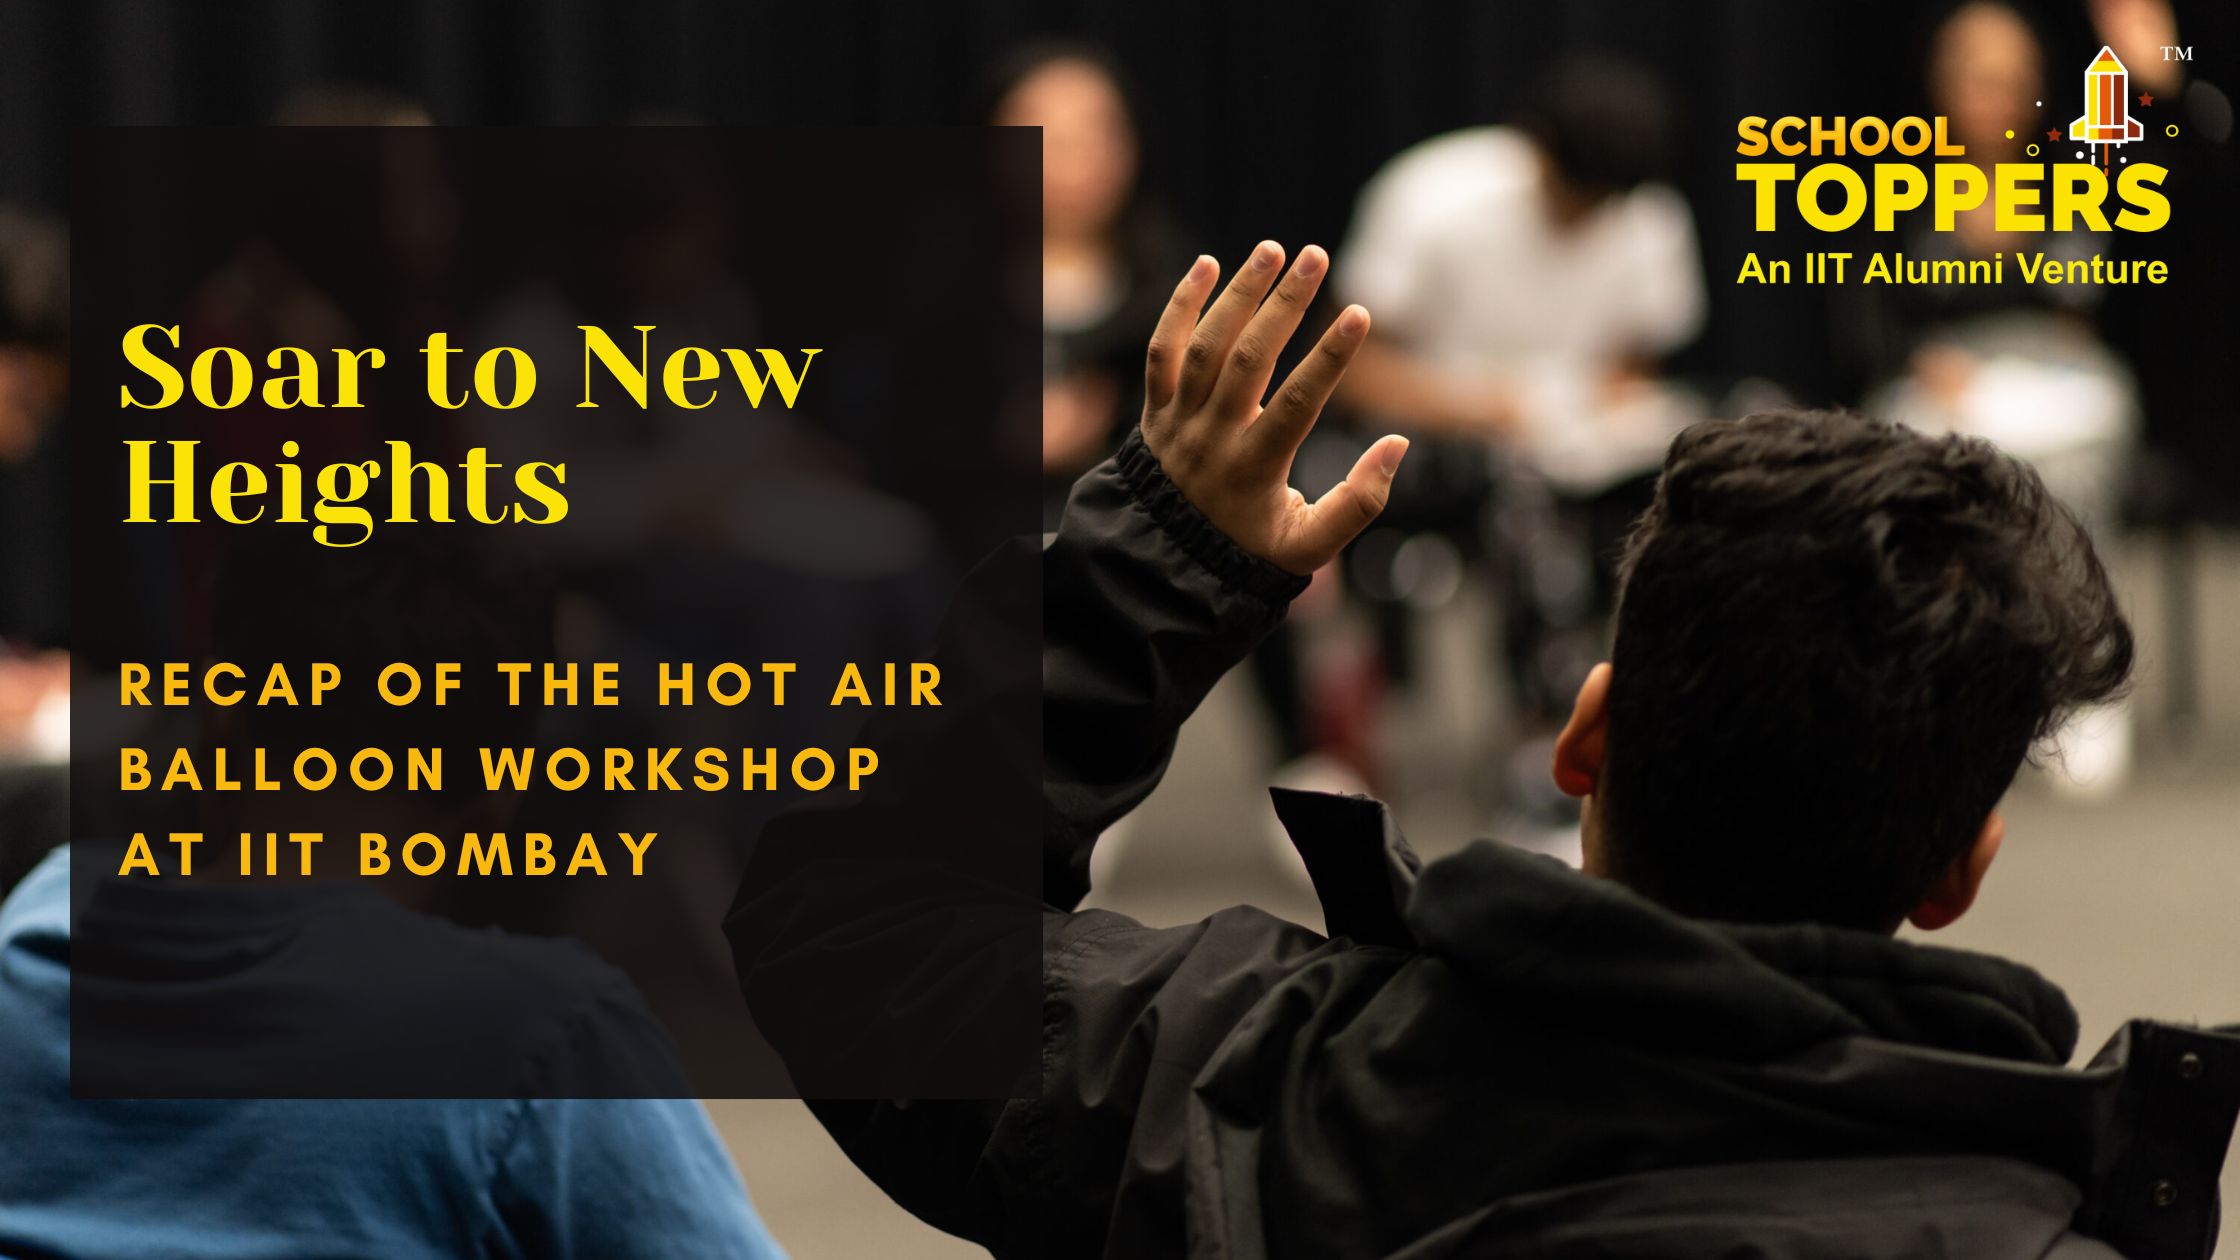 Soar to New Heights: Recap of the Hot Air Balloon Workshop at IIT Bombay